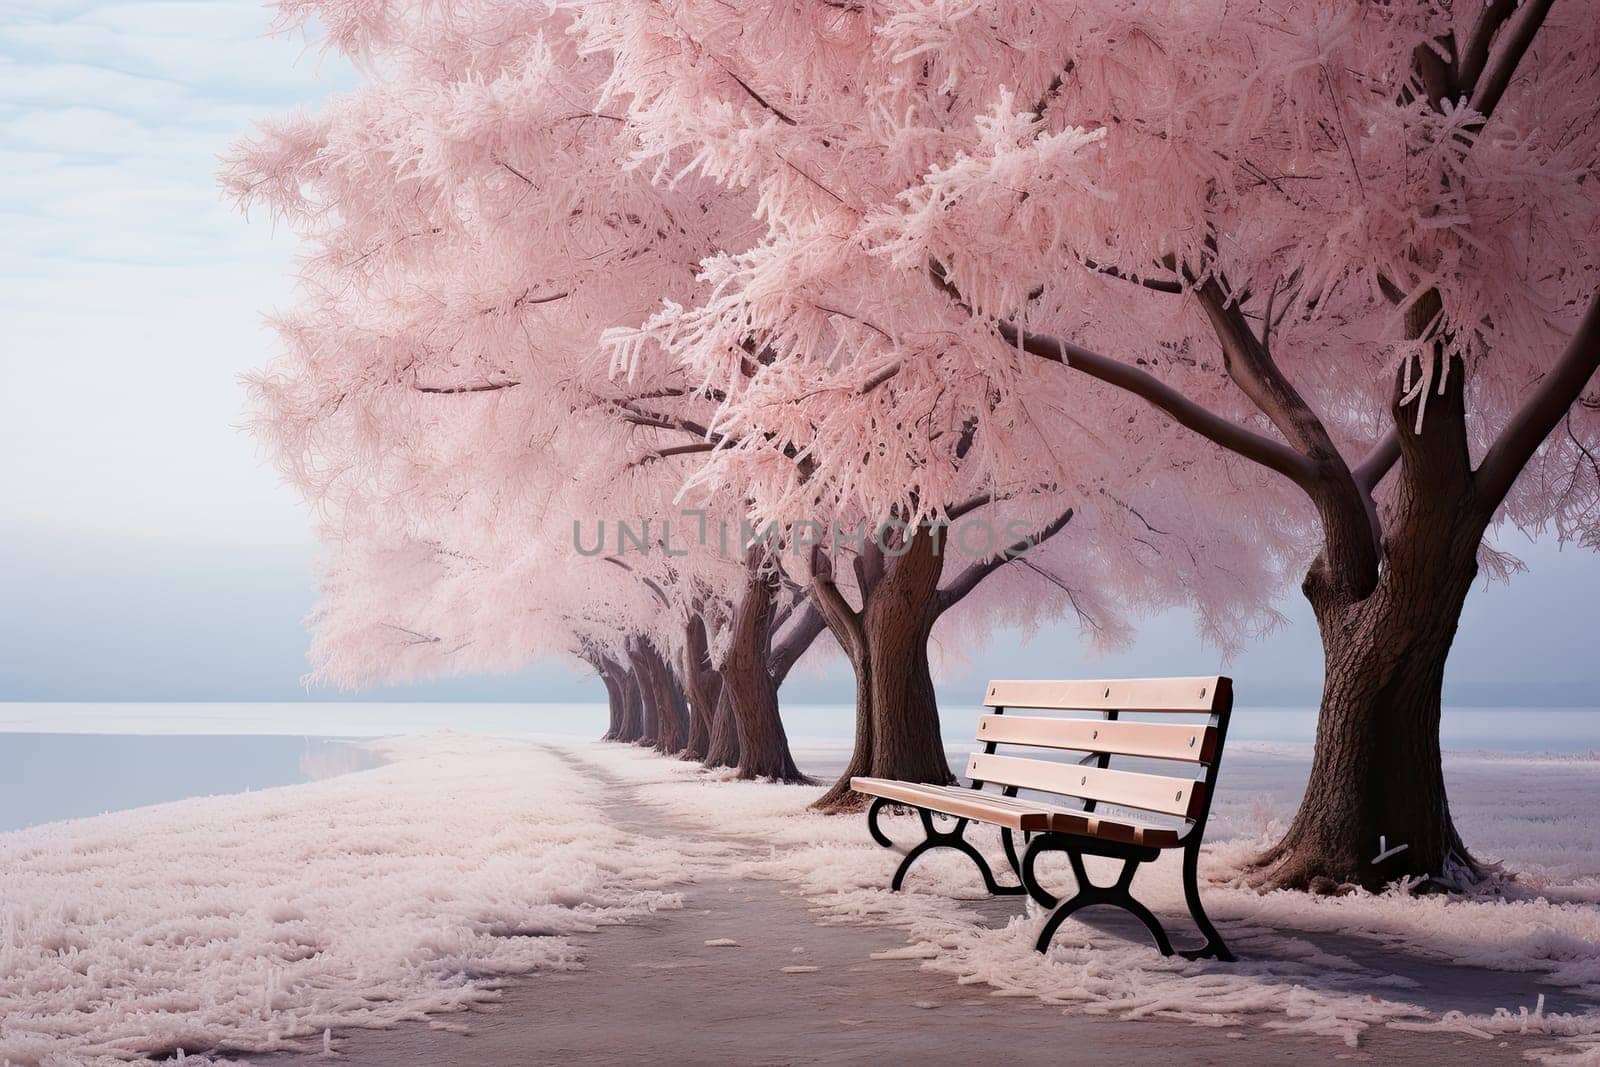 A painting of a park bench in the snow by golibtolibov